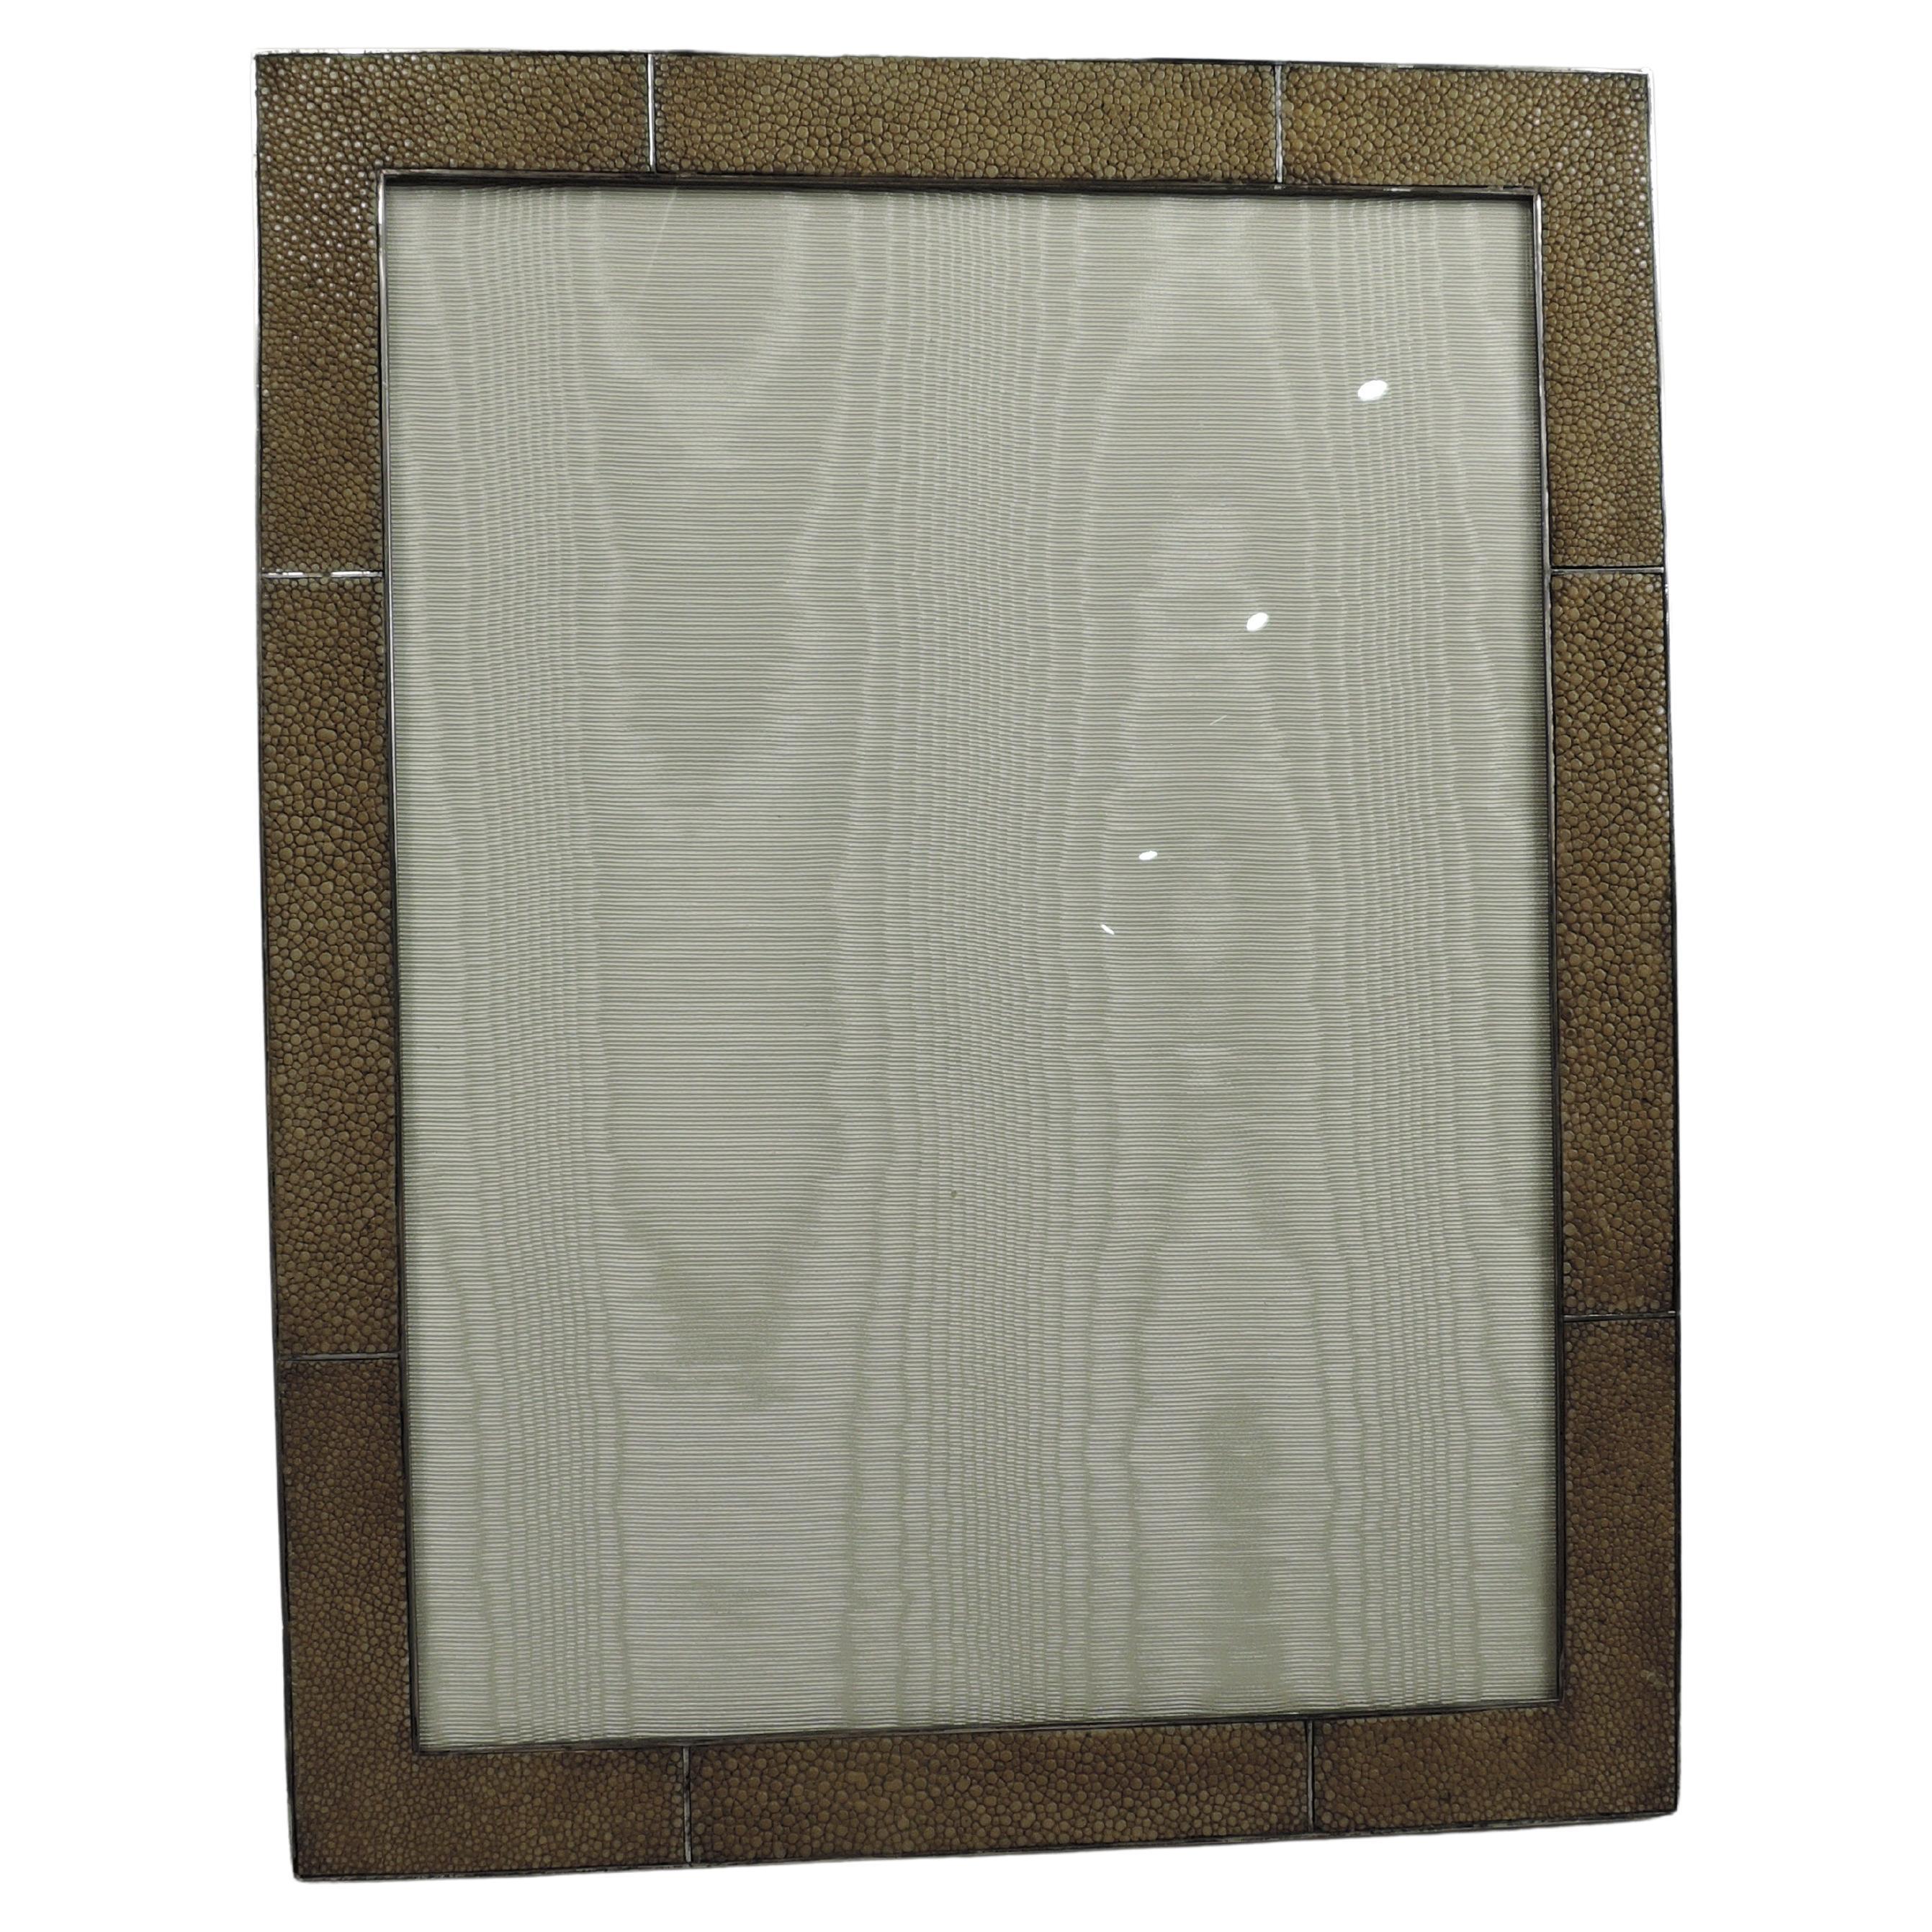 American Art Deco Sterling Silver & Shagreen Picture Frame